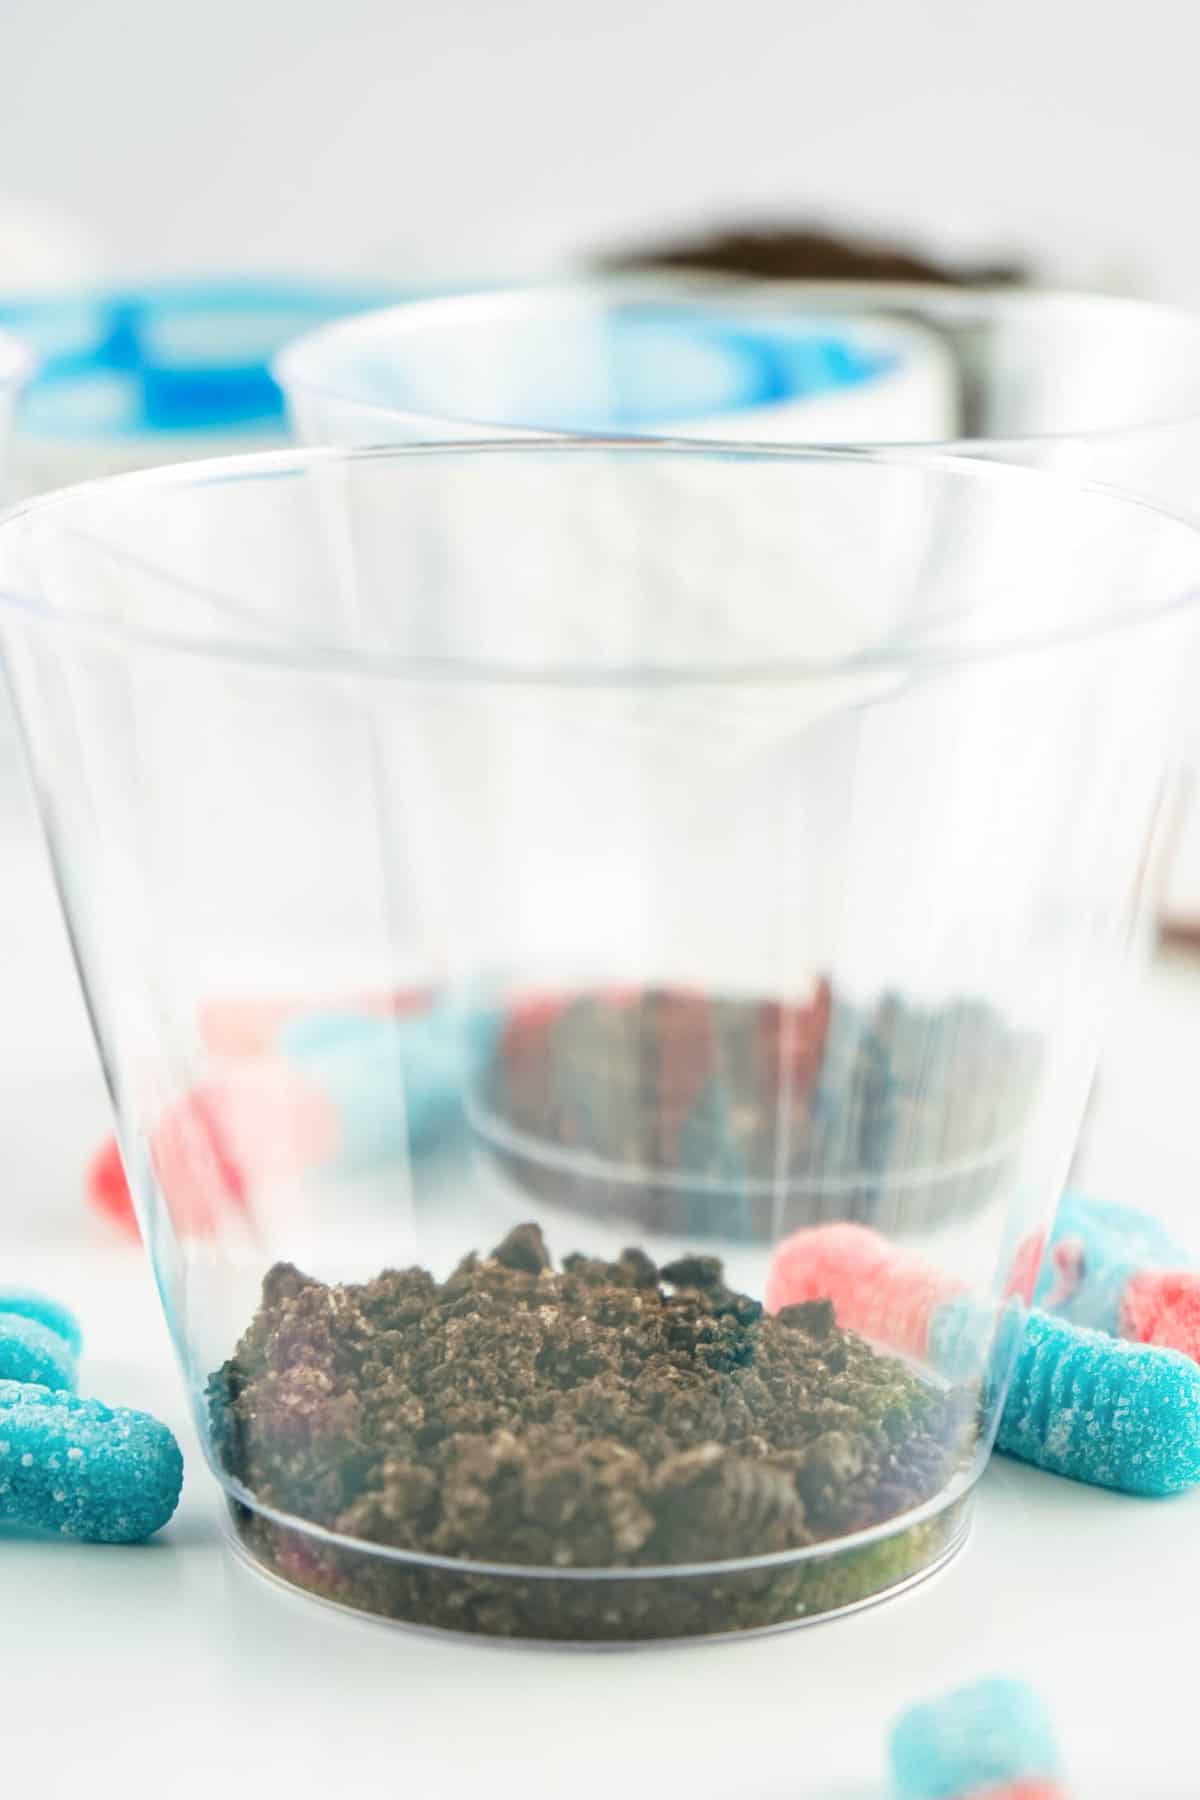 Layer Crushed oreos at the bottom of the cup.